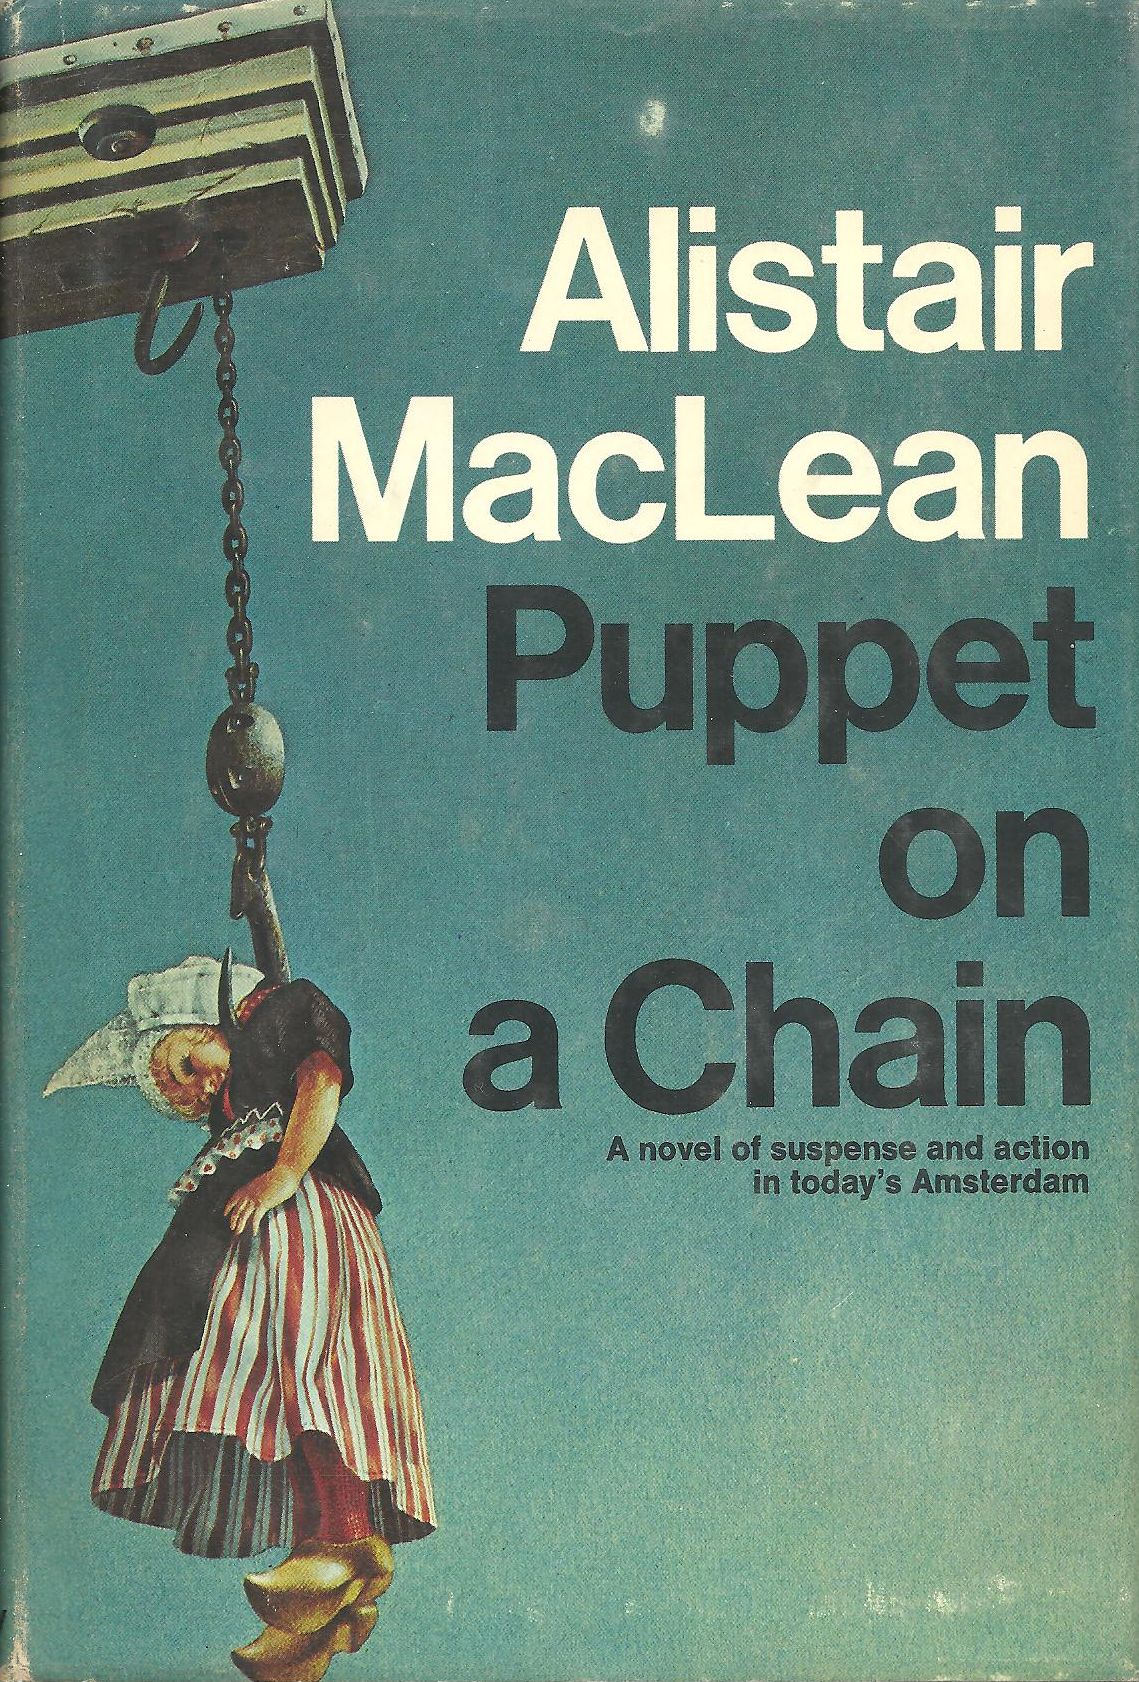 Puppet on a Chain - US first edition